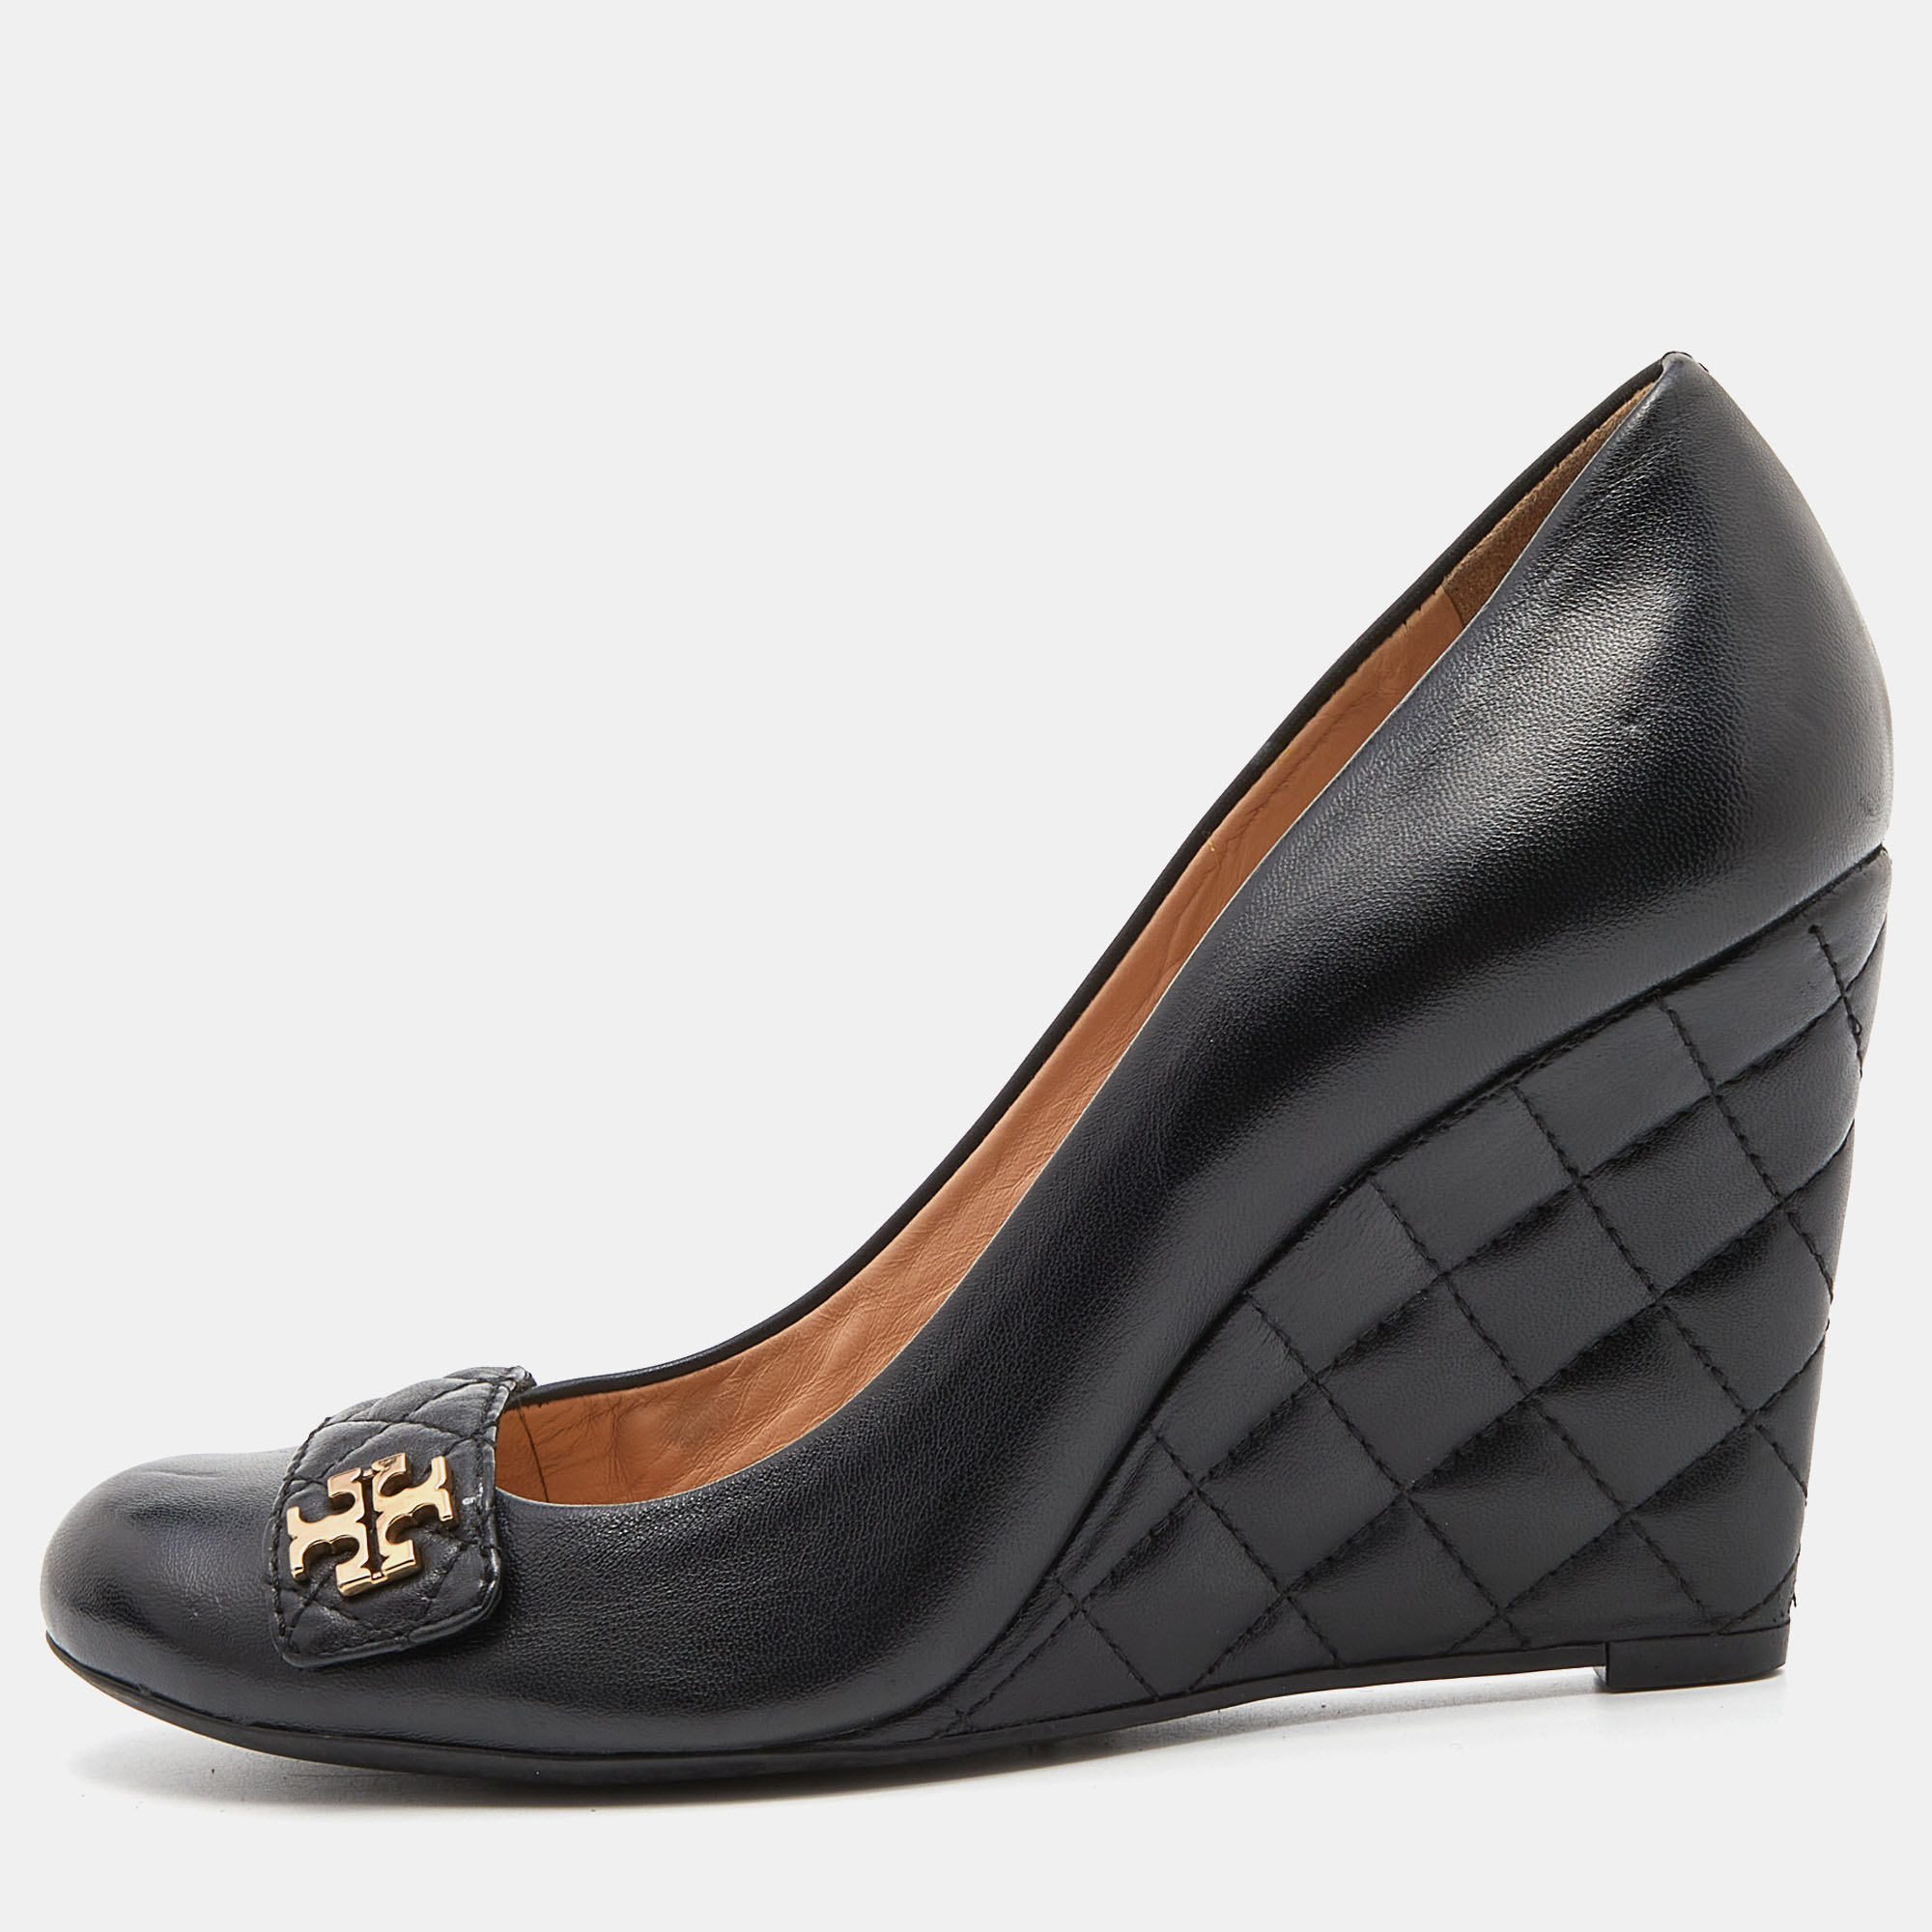 

Tory Burch Black Quilted Leather Leila Wedge Pumps Size